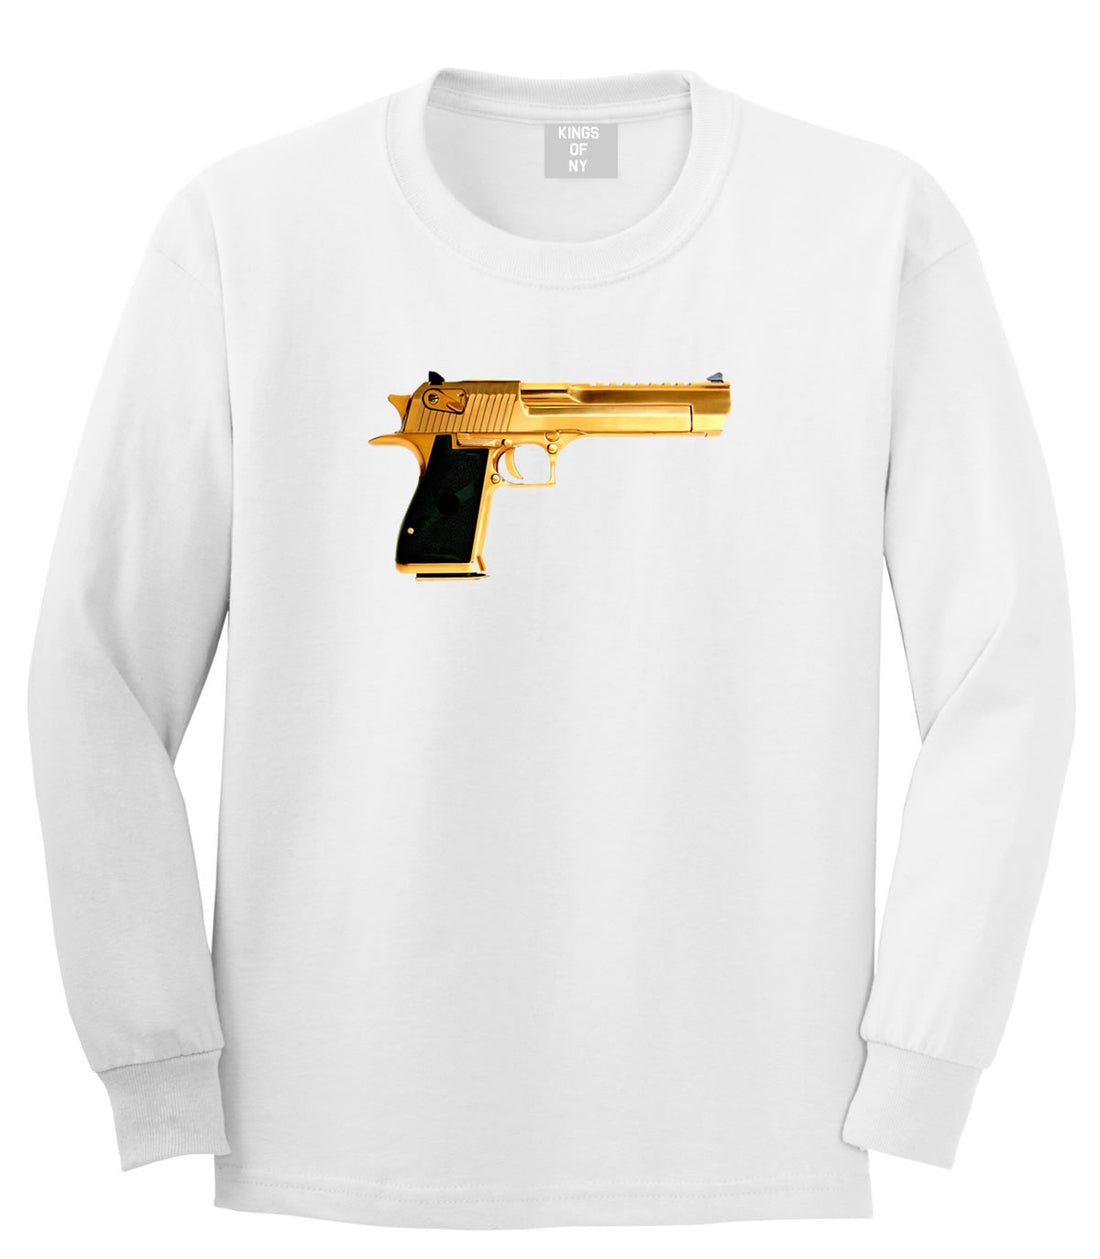 Gold Gun 9mm Revolver Chrome 45 Long Sleeve T-Shirt in White by Kings Of NY